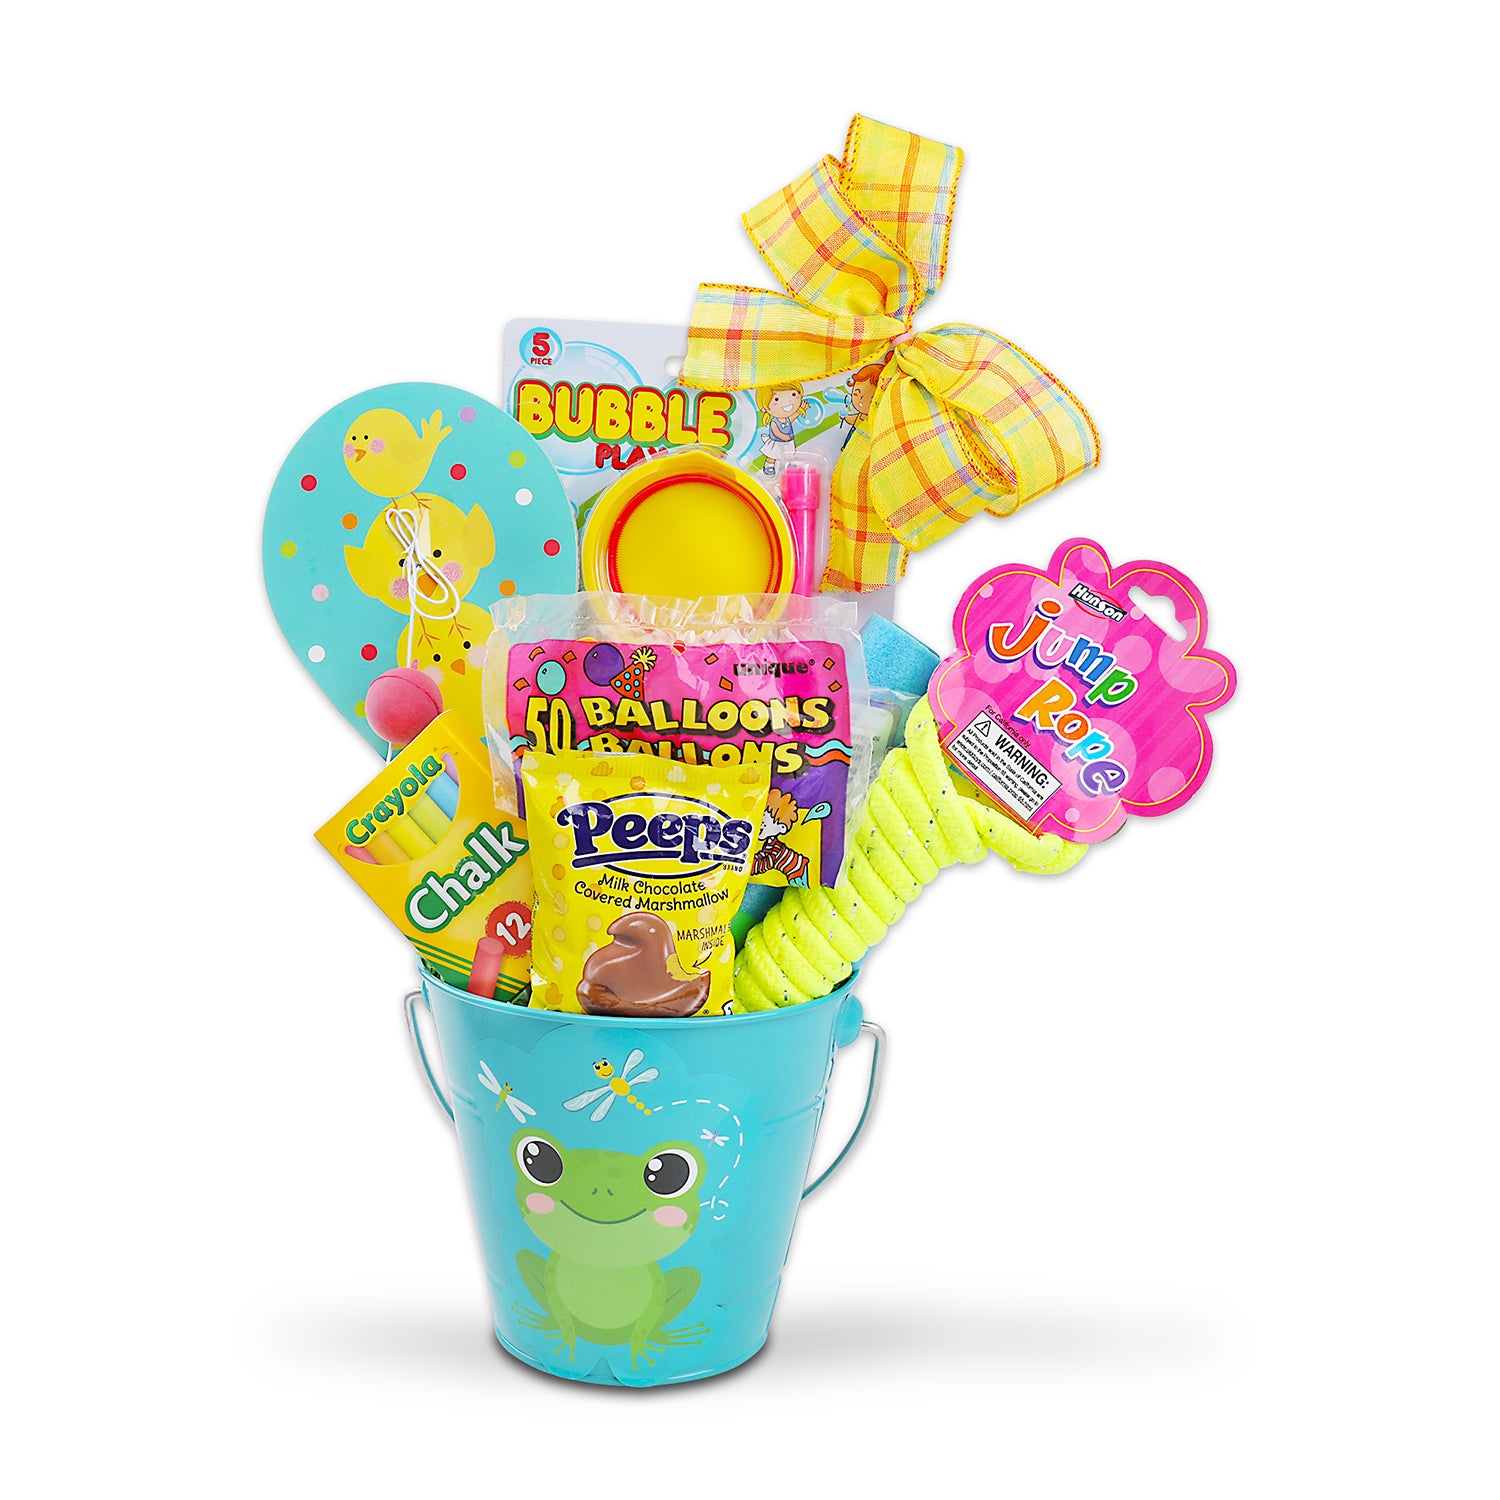 Peeps Milk Chocolate Marshmallow (1oz.), 3 Way Bubbles, Jump Rope, Easter Paddle Ball, Crayola Chalk Assorted Colors (12ct.), Water Balloons (50pcs.), Turquoise Metal Pail (6in x 6in x 5.5in)